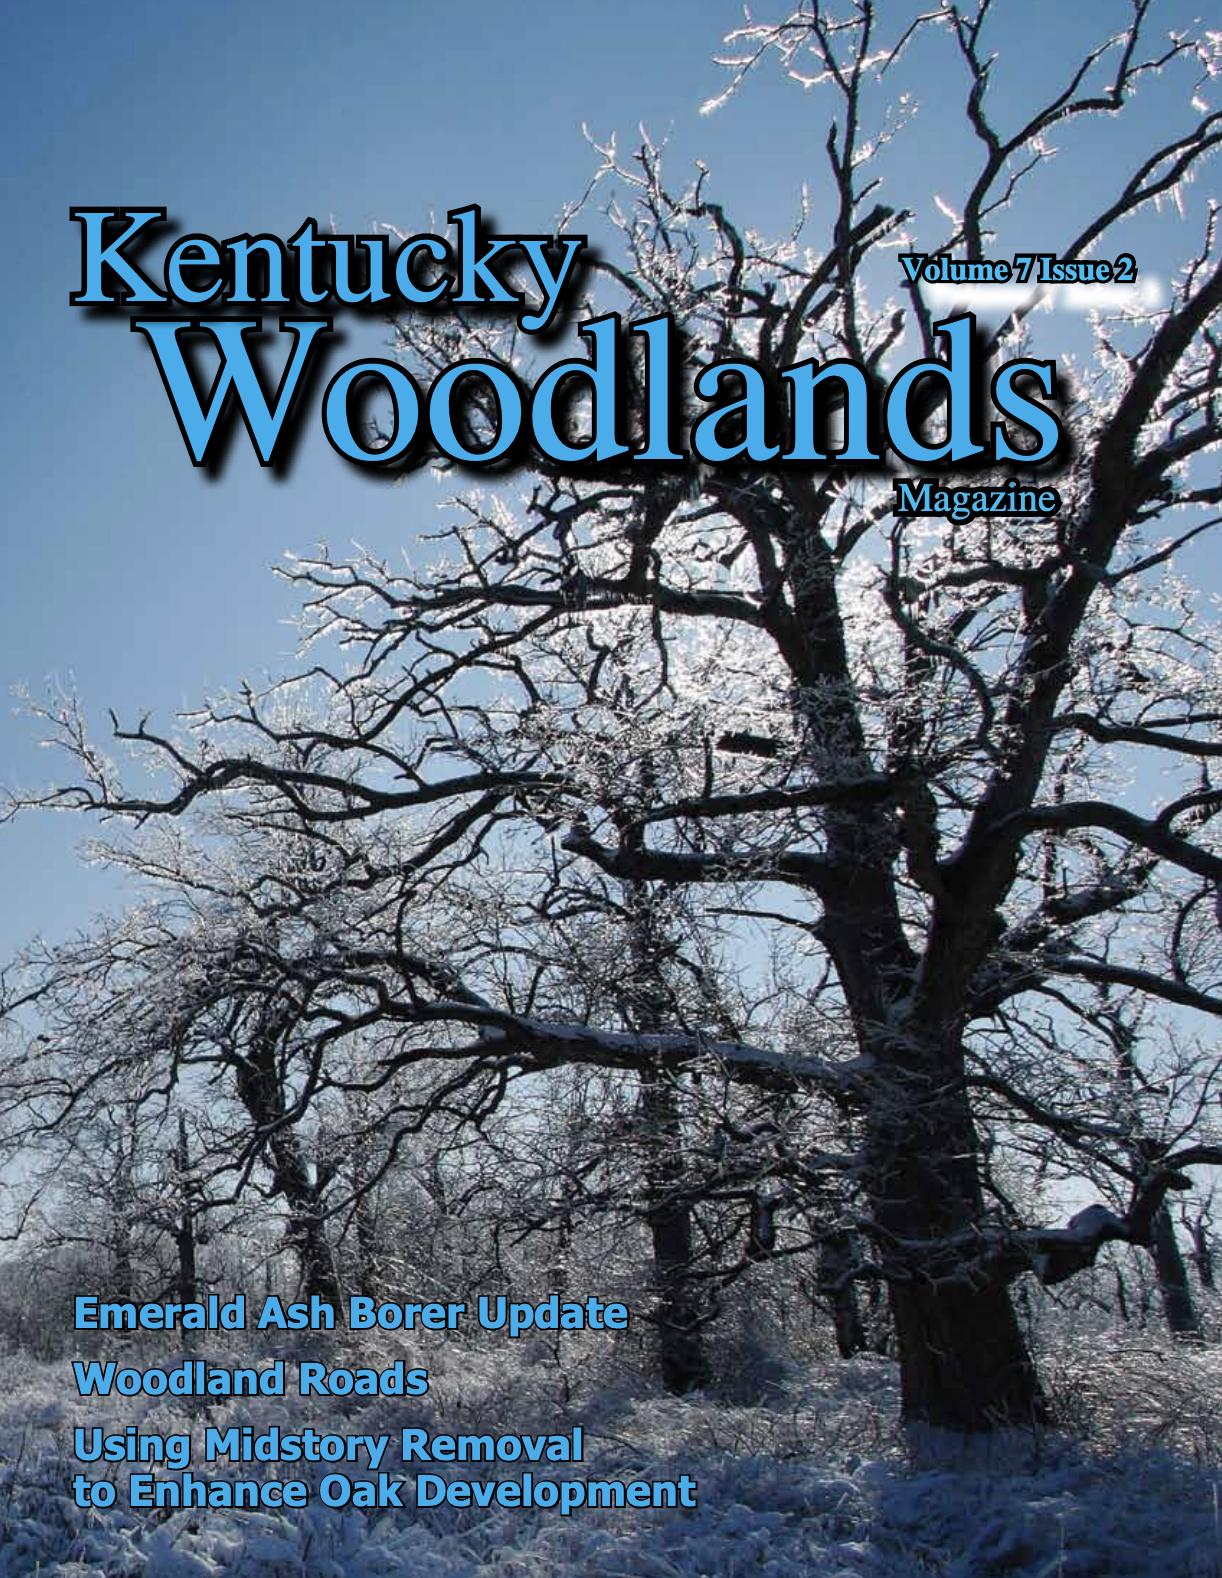 Kentucky Woodlands Magazine, Volume 7, Issue 2 Cover